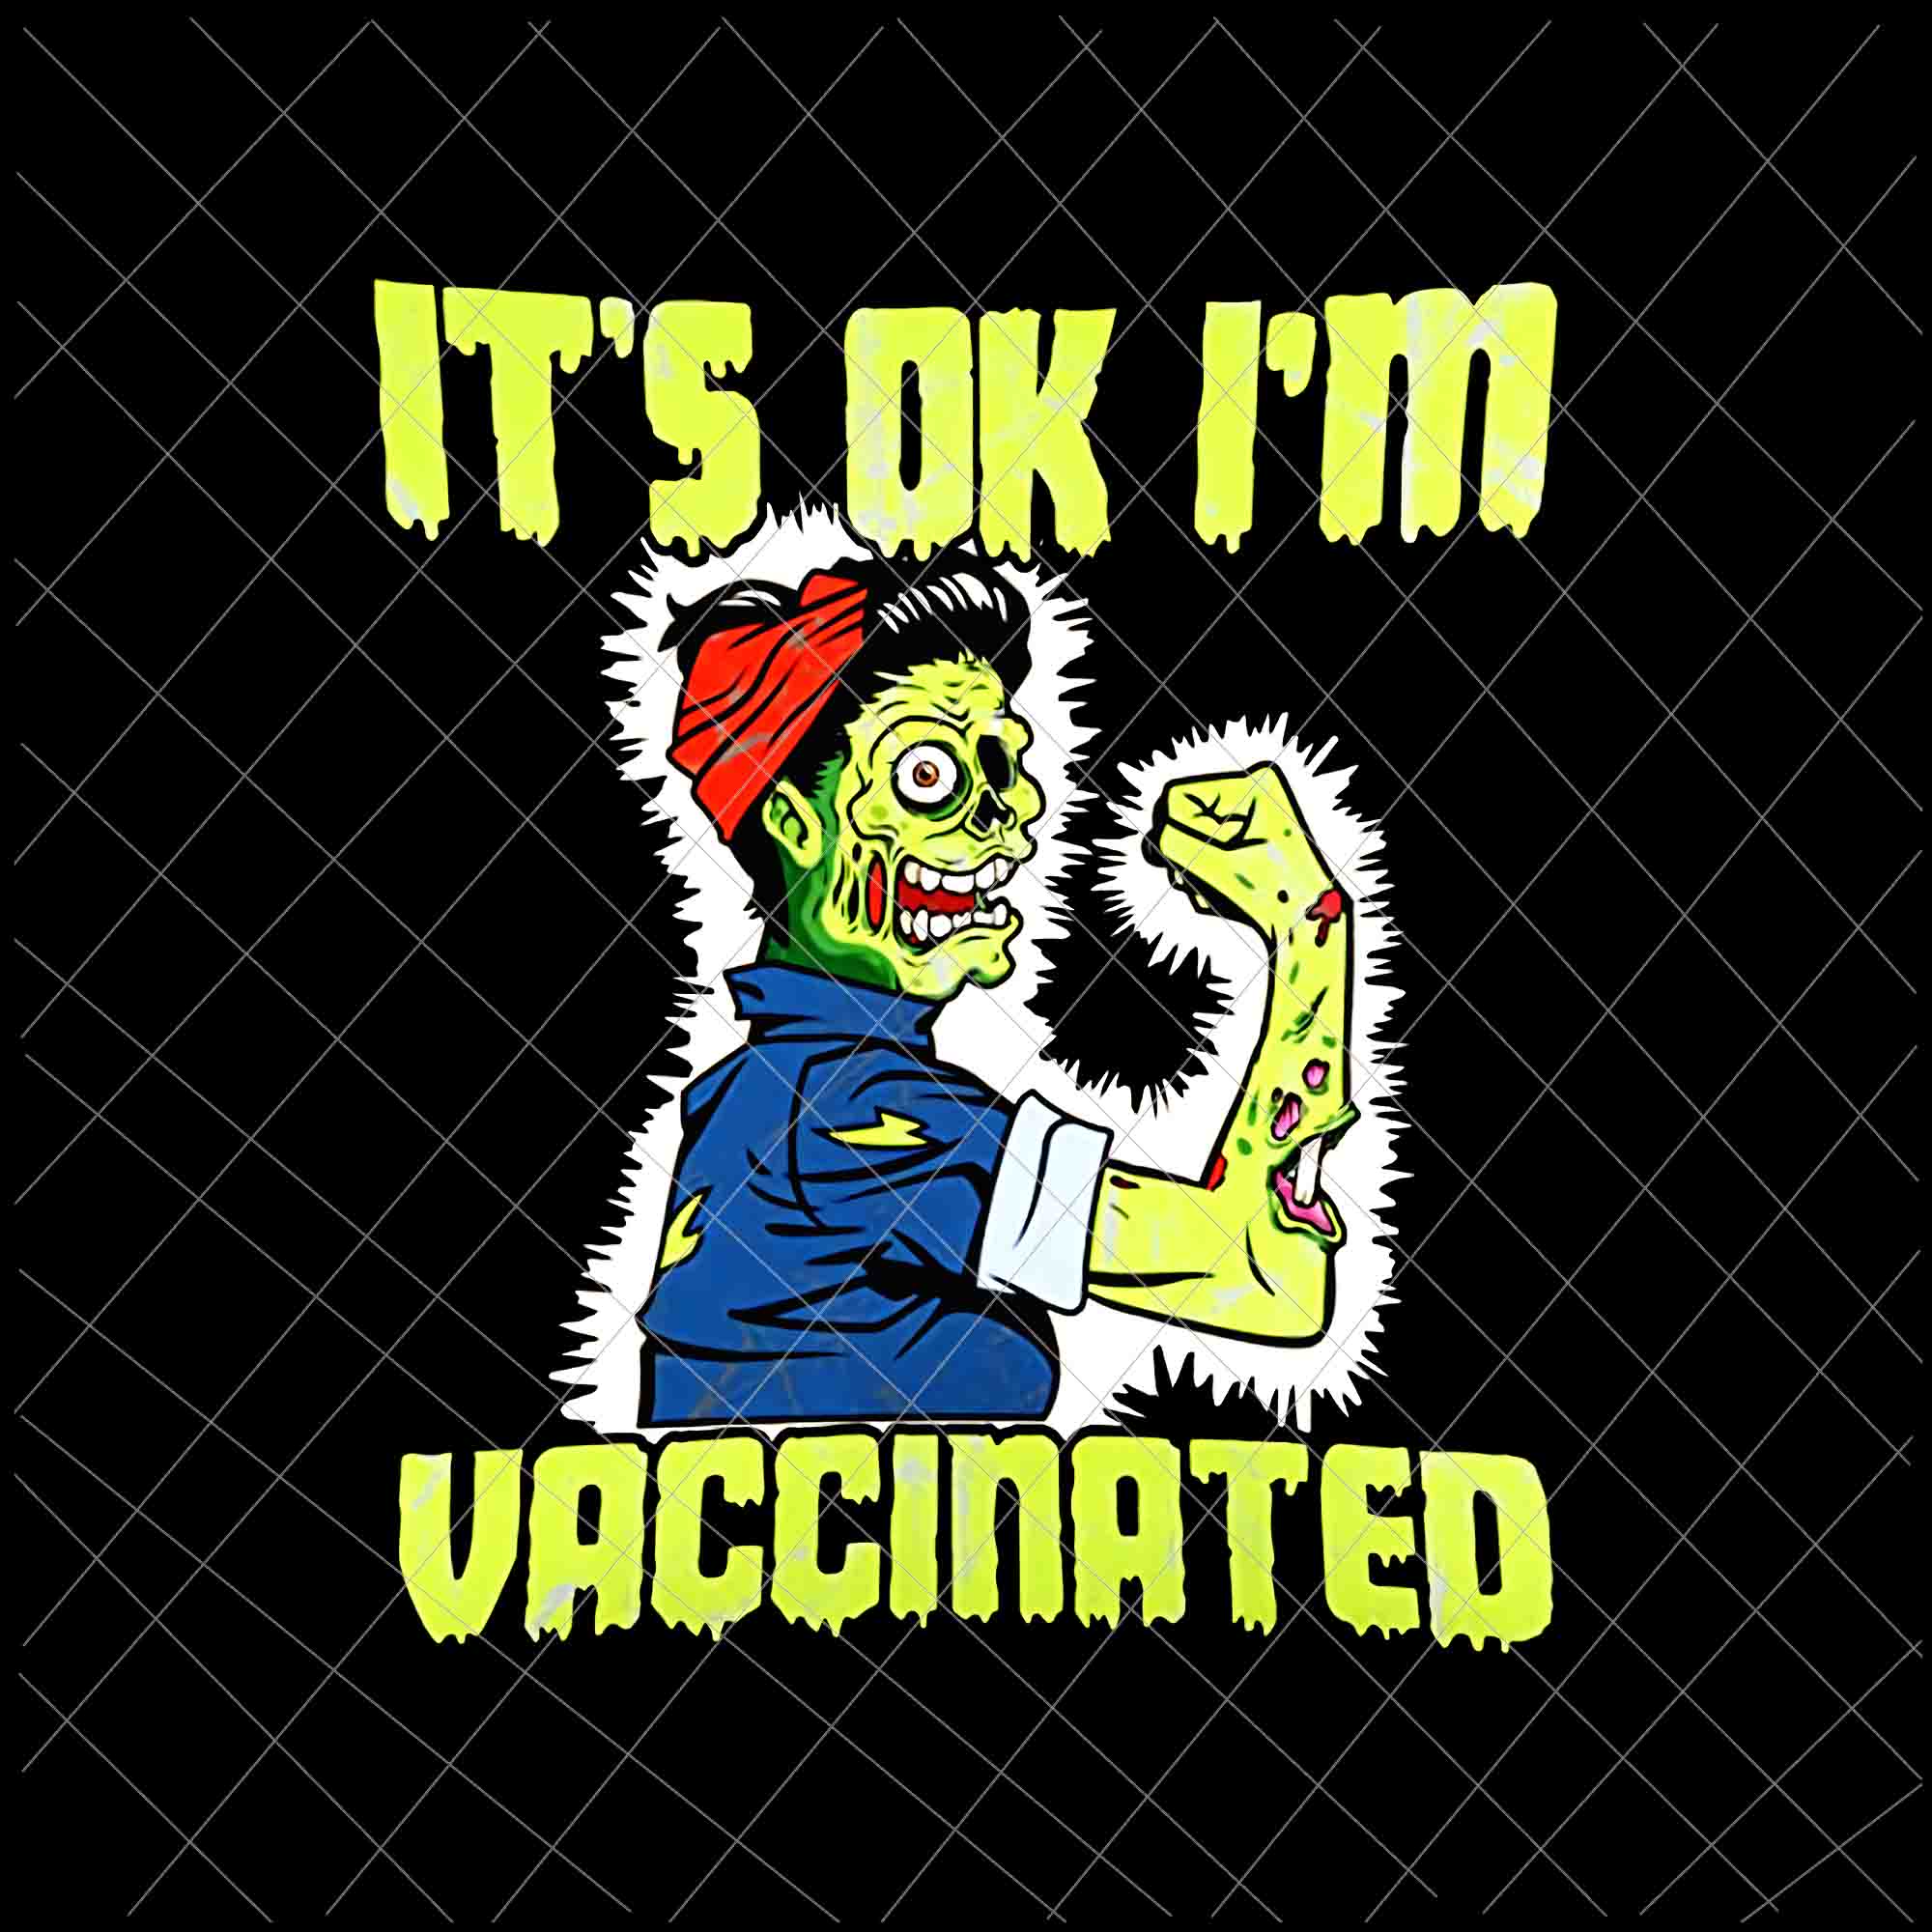 Halloween Party Png, It's Ok I'm Vaccinated Png, Gothic Ugly Halloween Png, Halloween Design Png